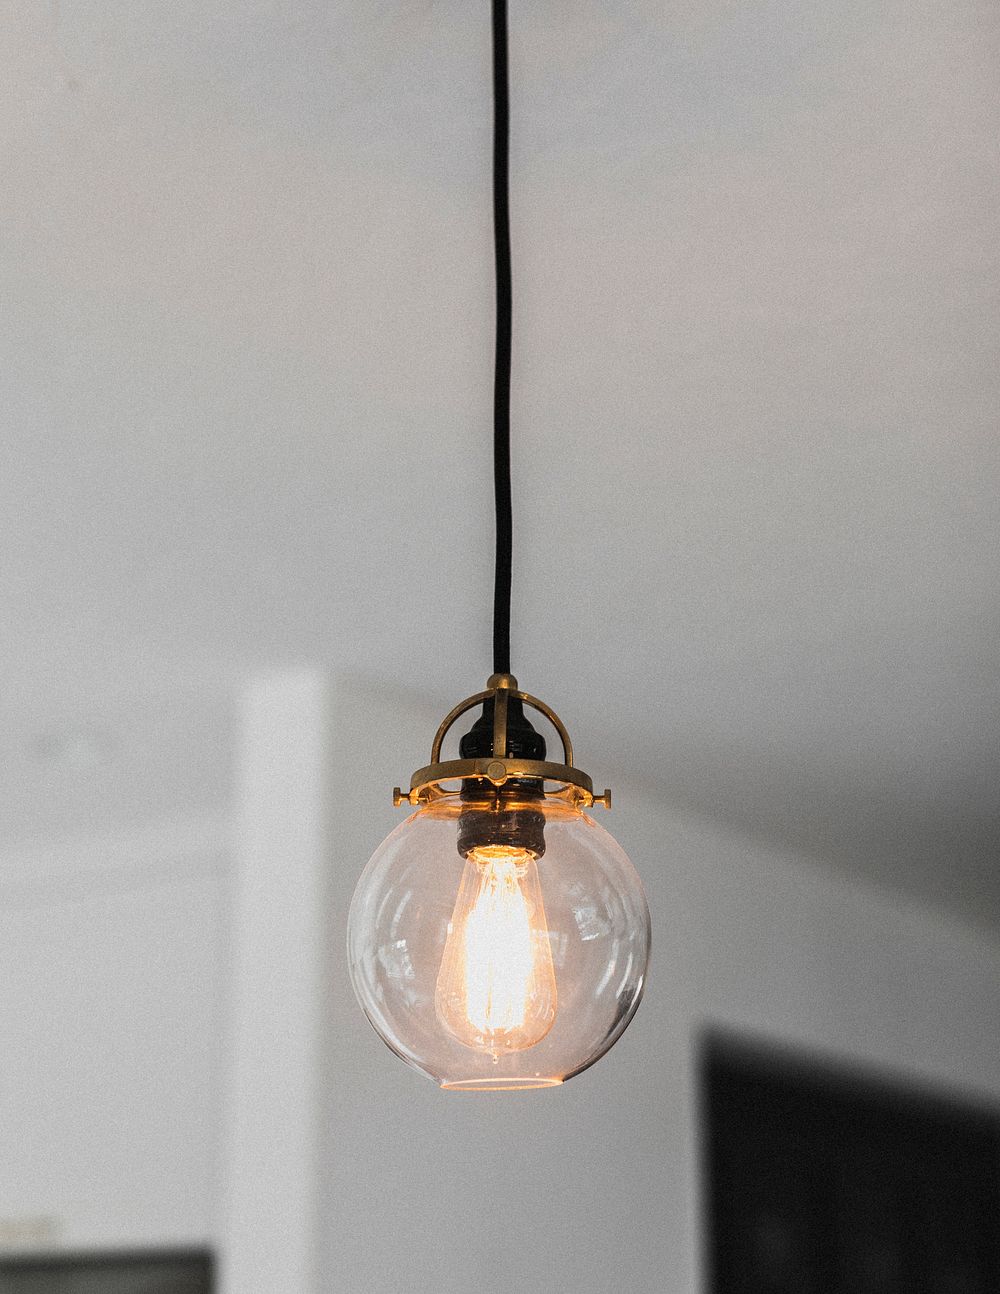 Bright light bulb in a house